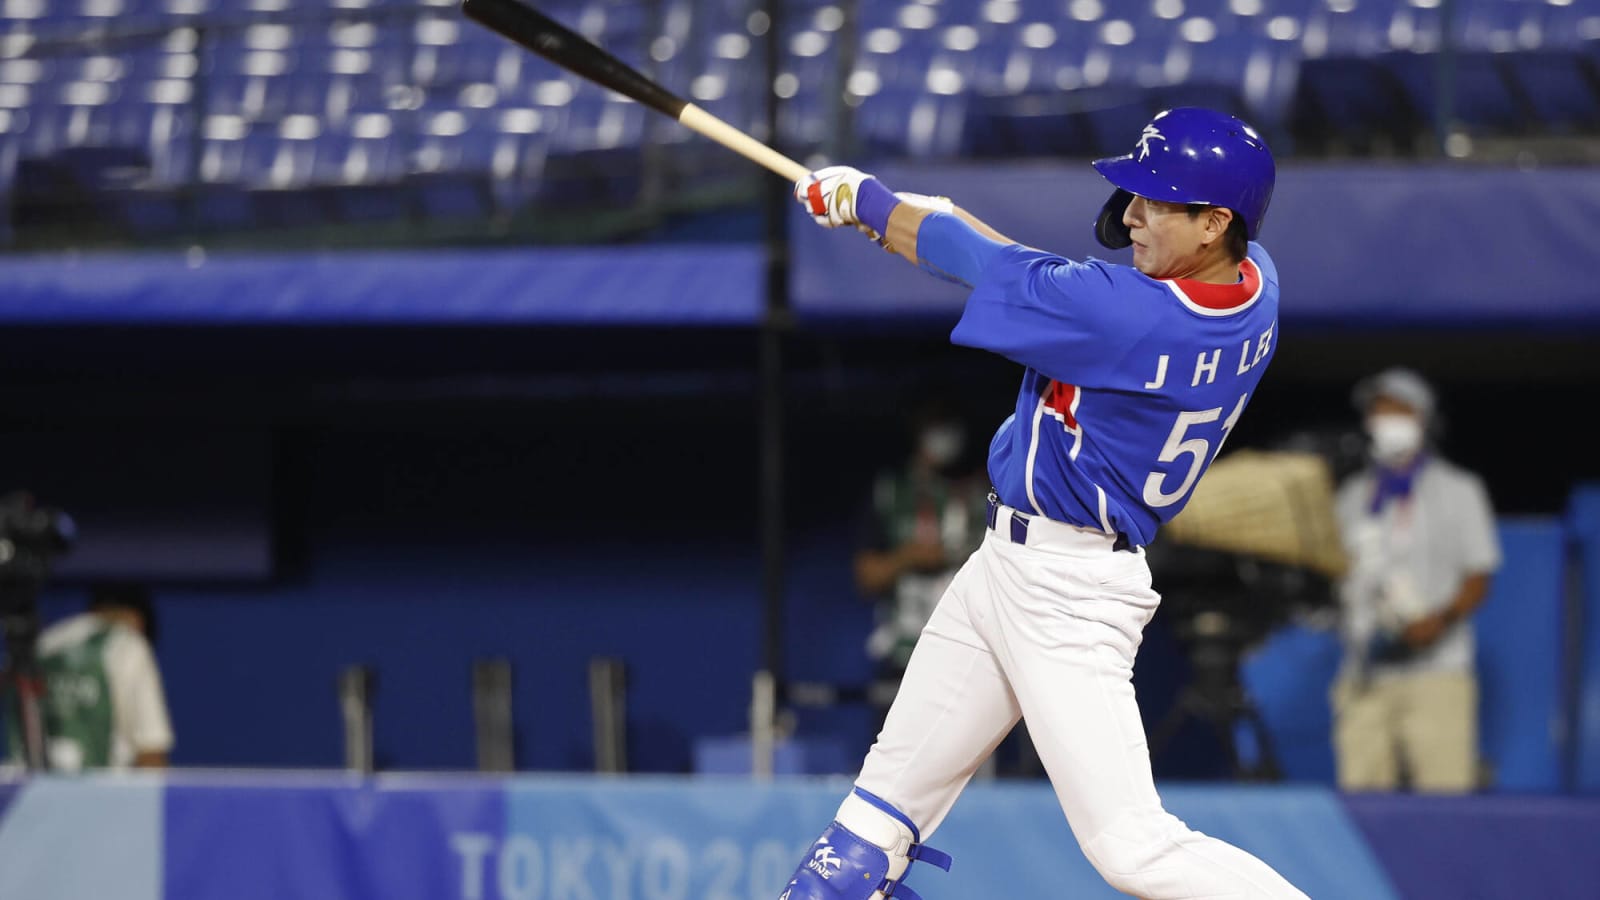 Jung Hoo Lee Signs $113 Million Deal with the Giants